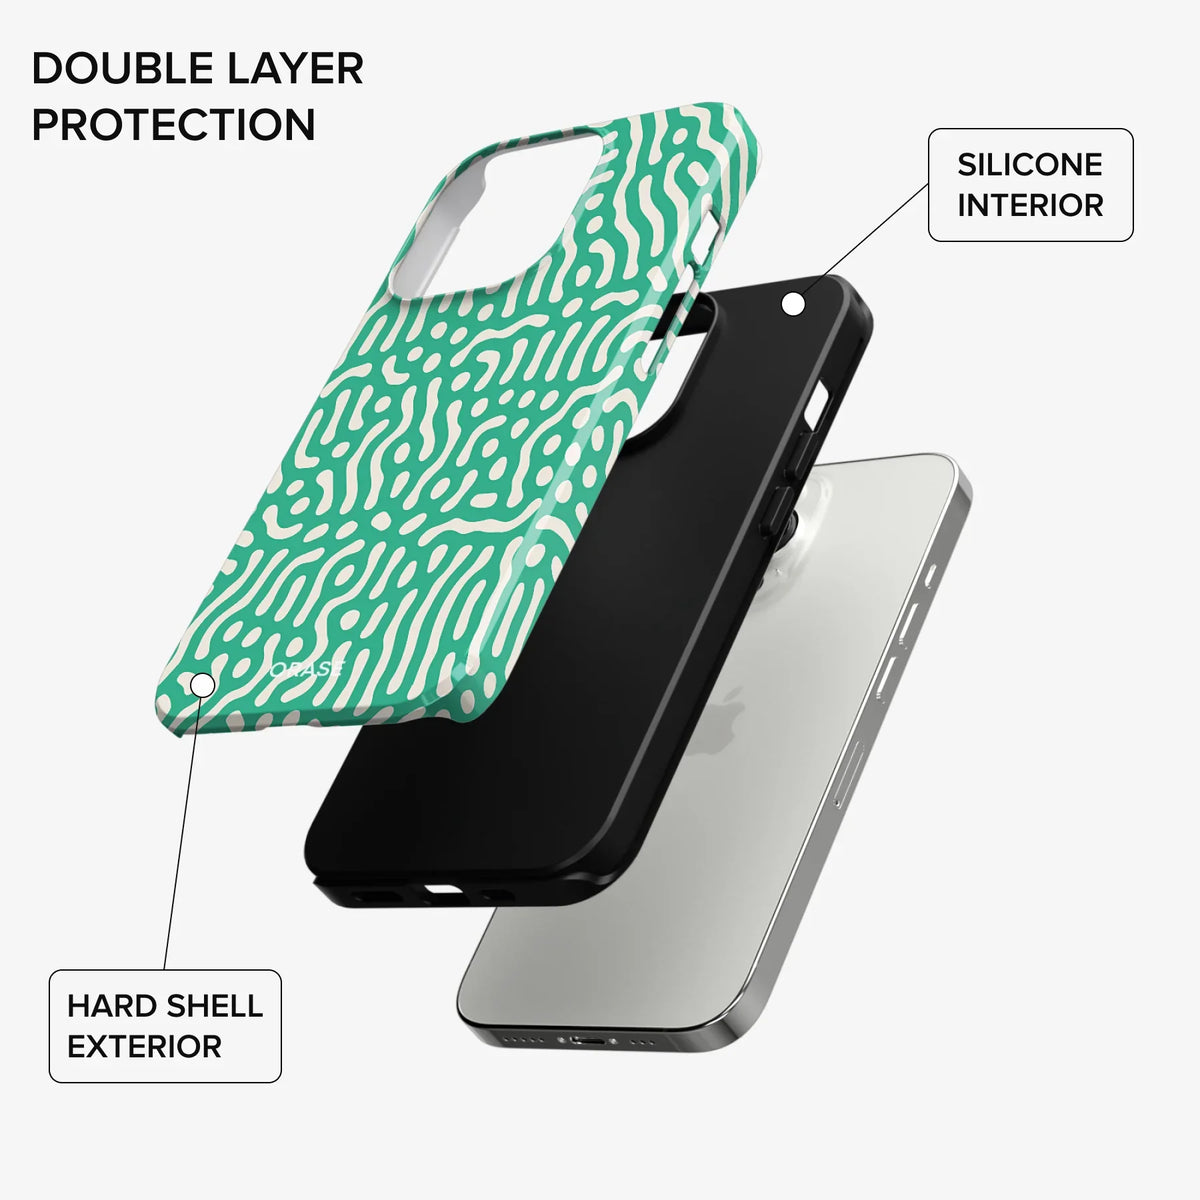 Lune Green iPhone Case - iPhone 13 Pro Max